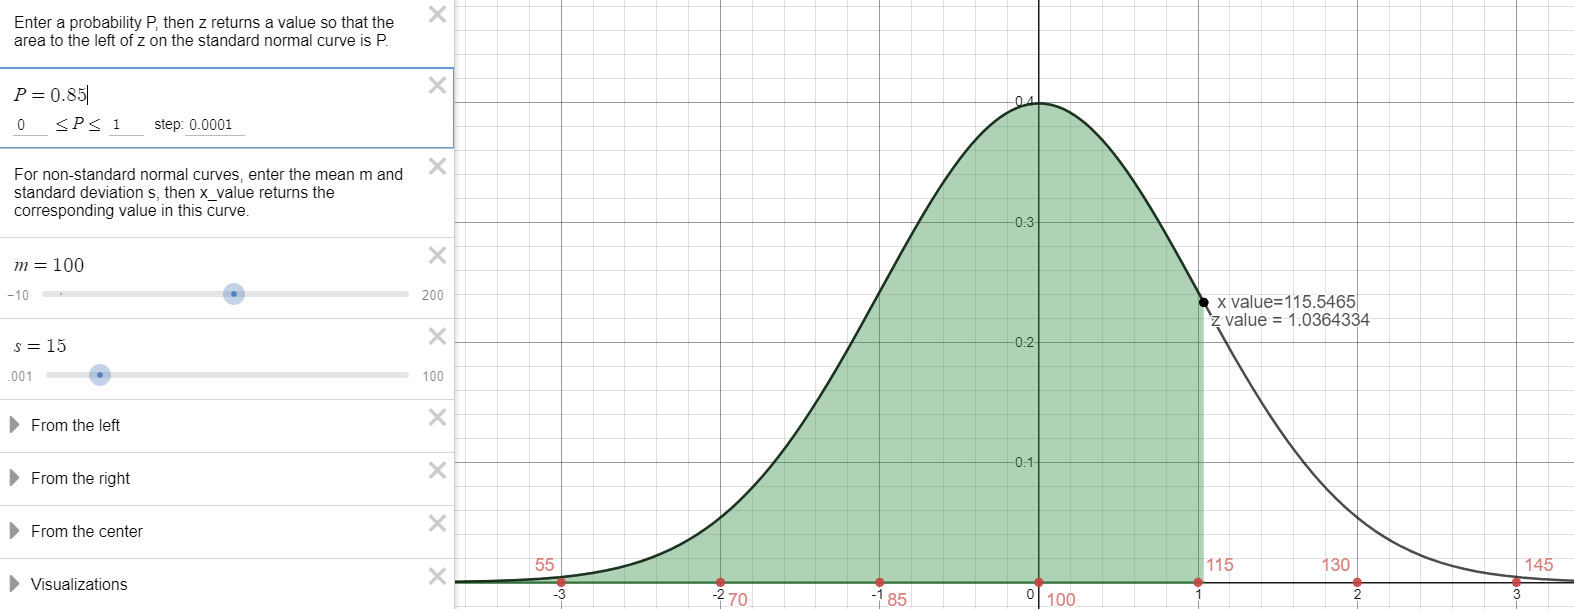 A normal curve with the mean of 100 at the highest point of the curve. The horizontal axis is labeled with 3 standard deviations to the left and to the right of the mean. The labels are 55, 70, 85, 100, 115, 130, and 145. In the left margin of the graph it is stated that p=.85, mean = 100 and standard deviation = 15. The calculated z value is 1.036433. The calculated x value is 115.15. The area under the curve is shaded to the left of the x value.